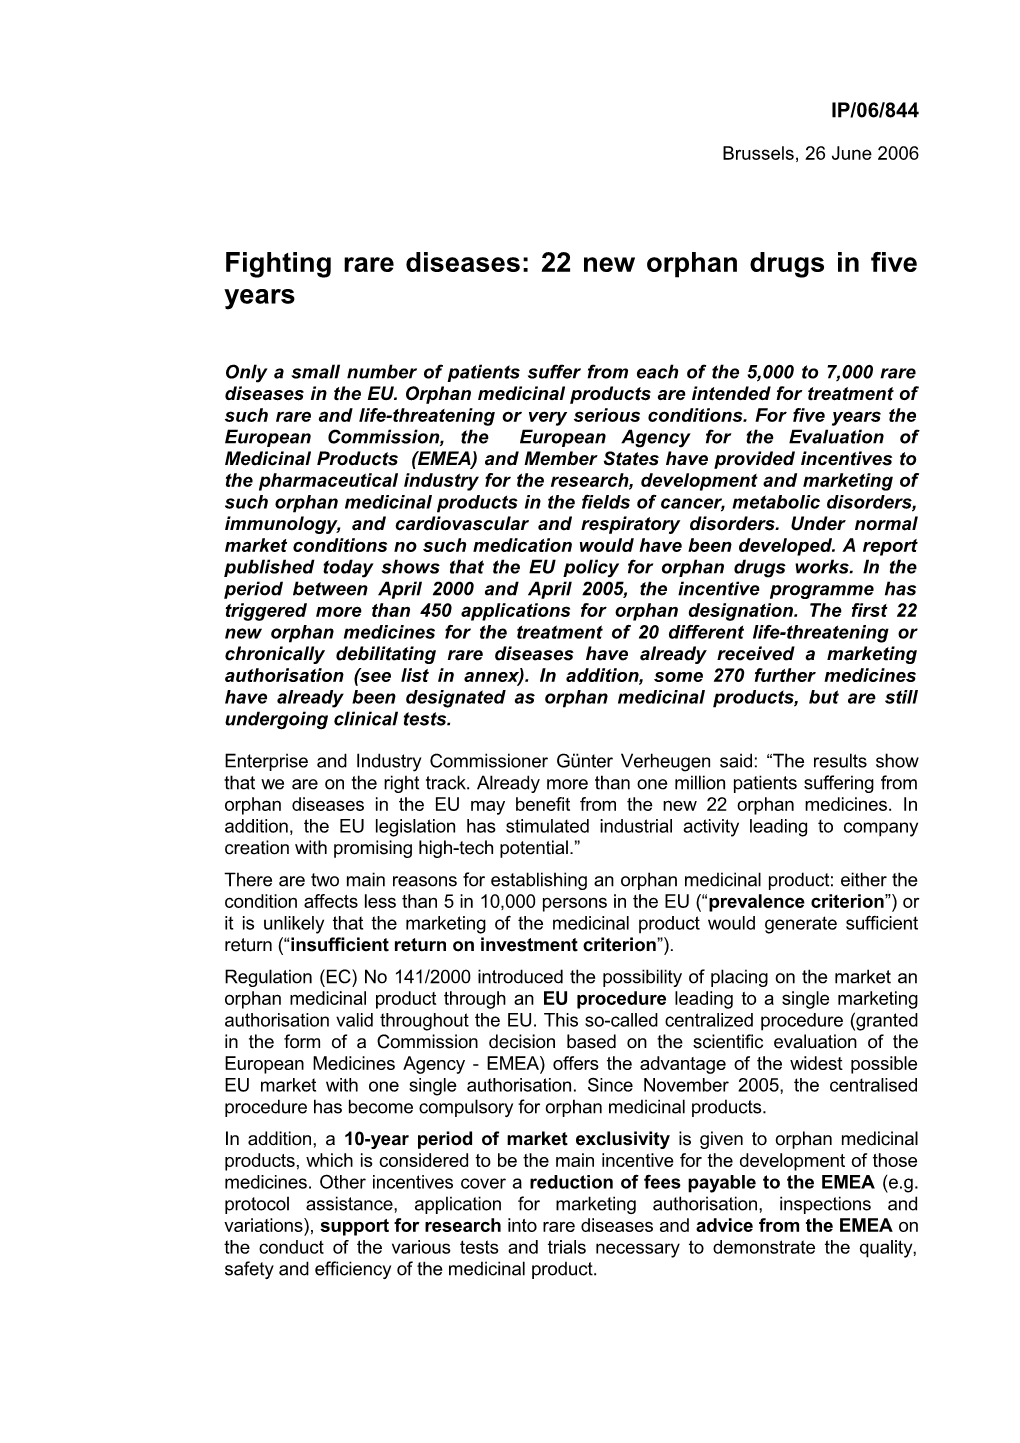 Fighting Rare Diseases: 22 New Orphan Drugs in Five Years